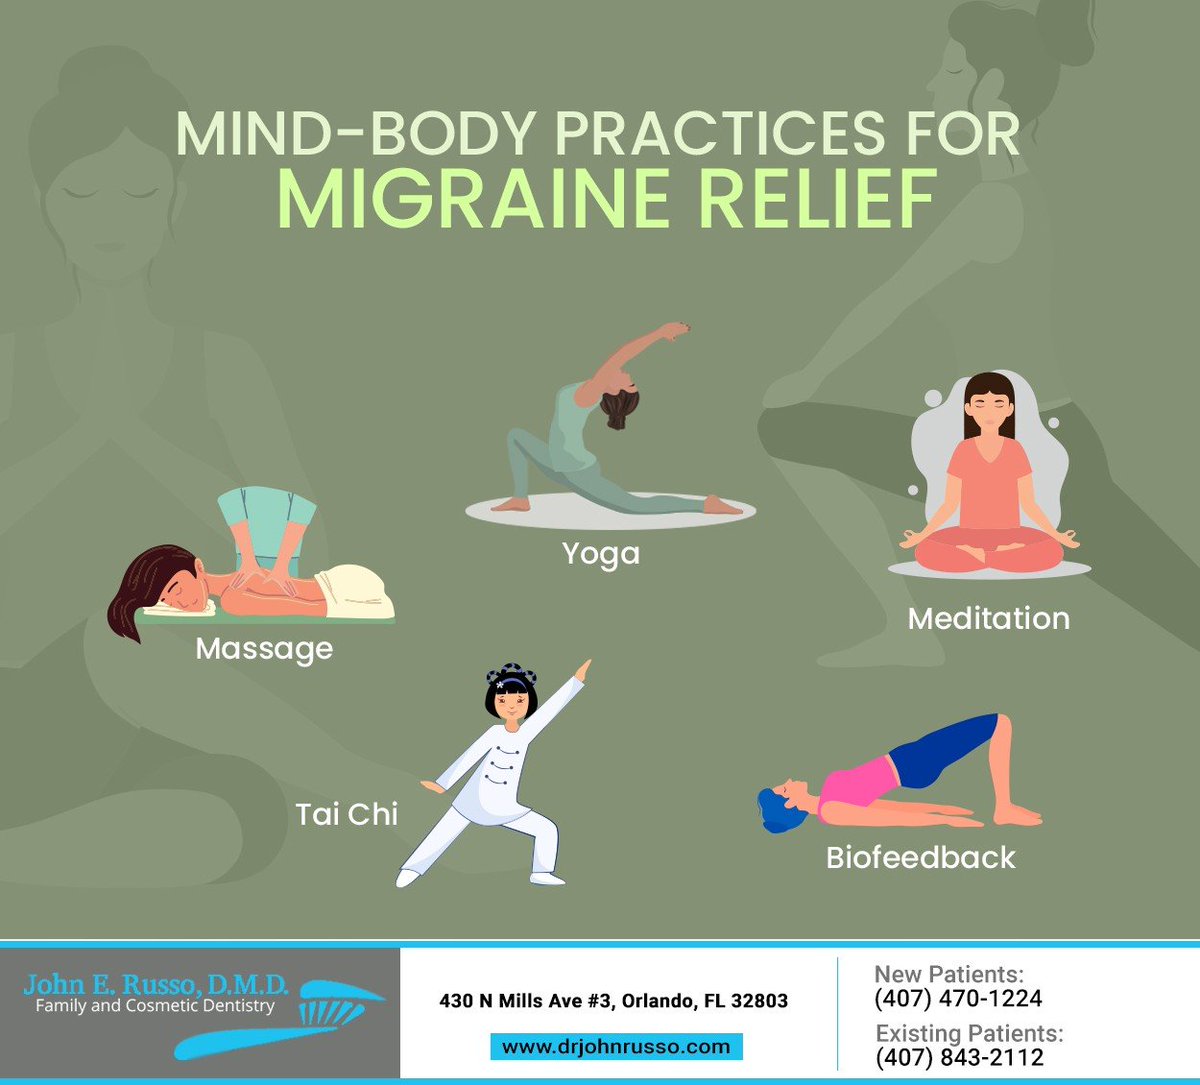 These mind-body practices promote overall health and well-being and can be practiced during or in between migraine attacks to help prevent or alleviate your symptoms. #mindbodyconnection #migrainerelief      #JohnERussoDMD #Orlando #FL